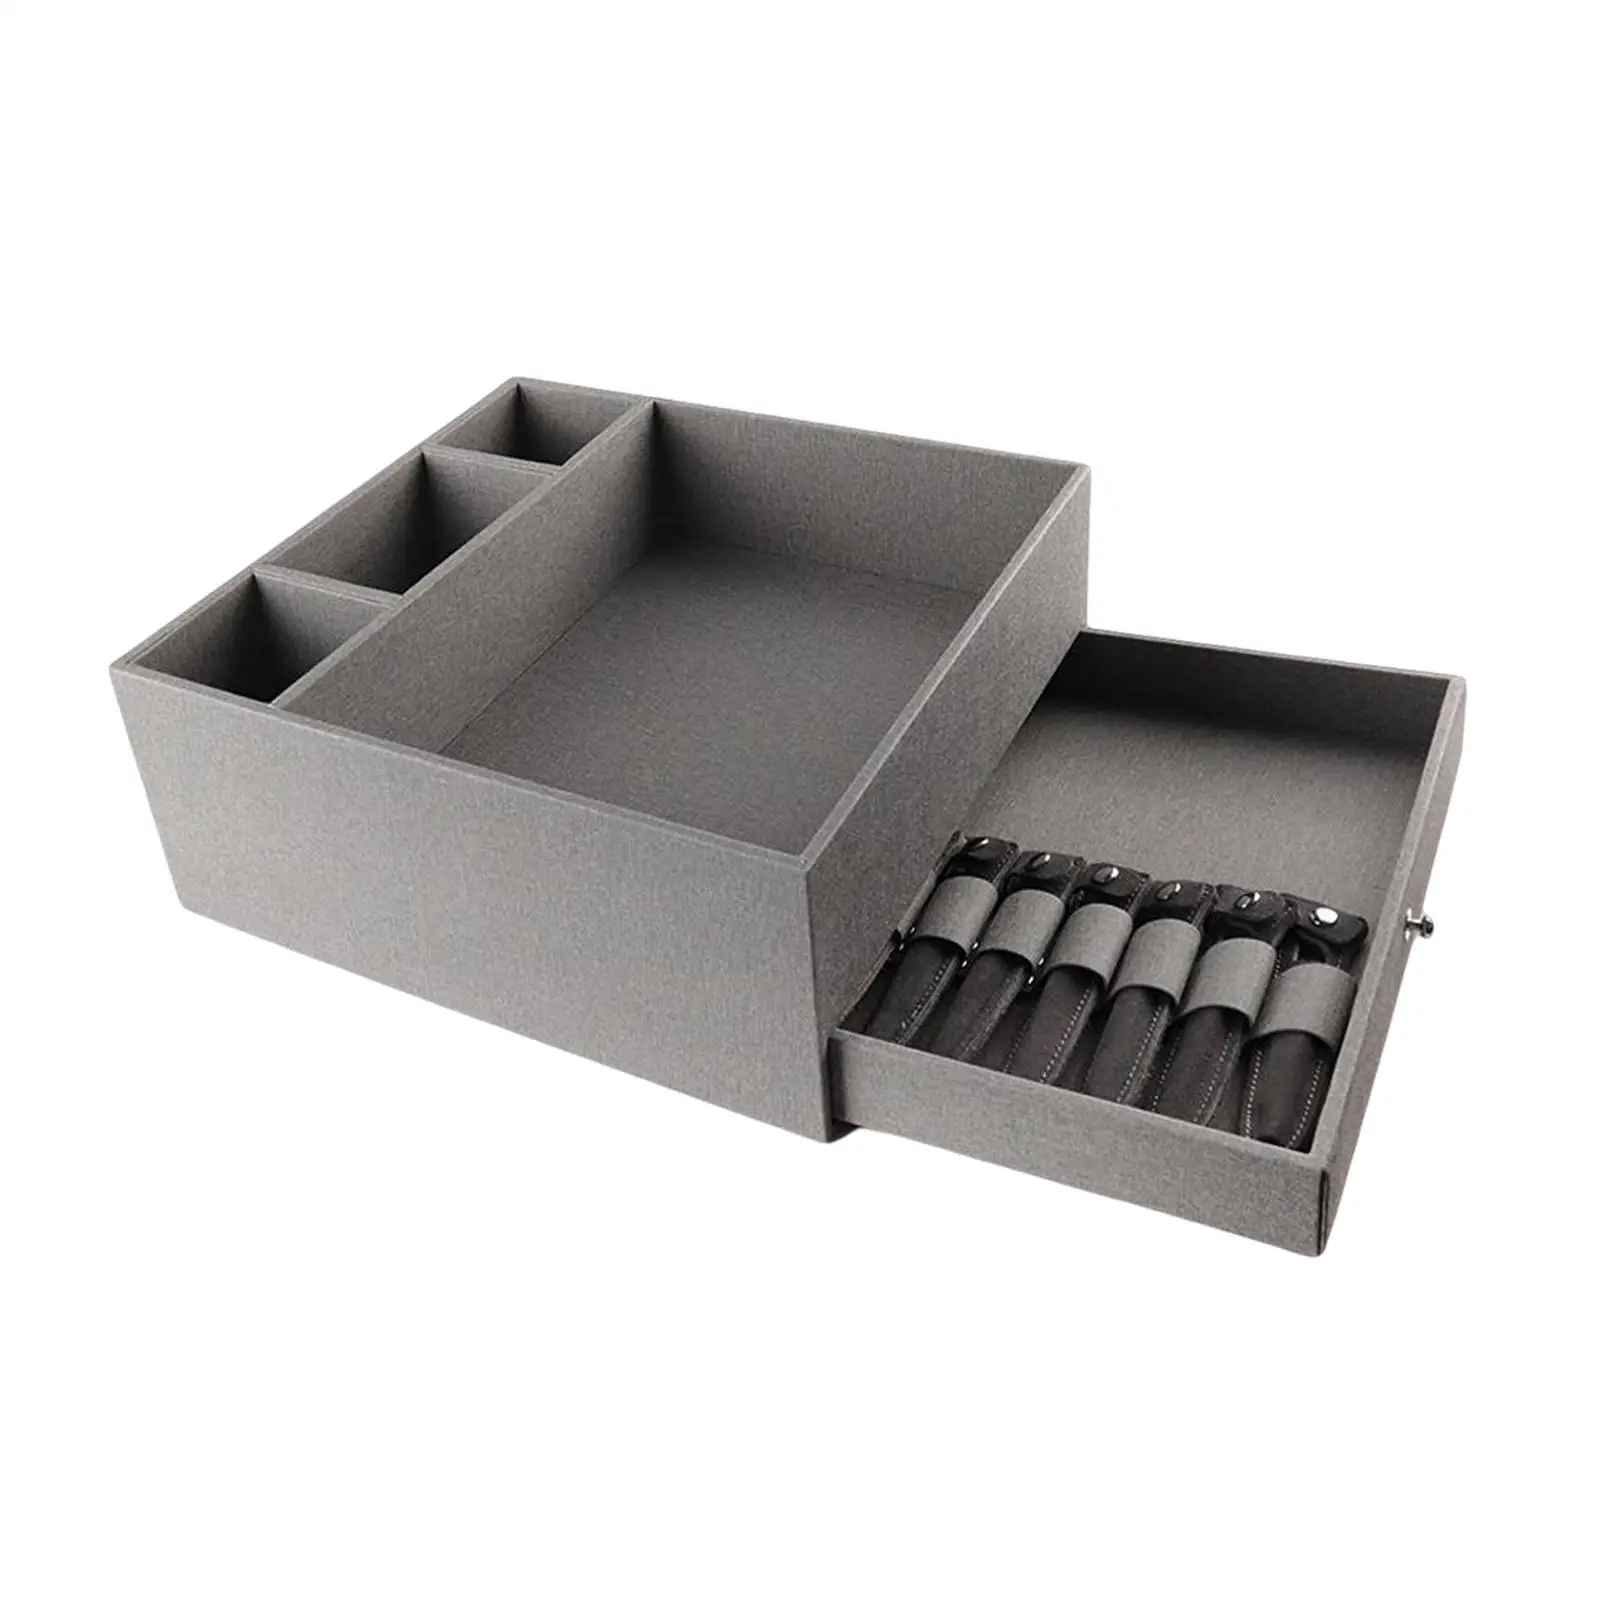 Professional Hairdressing Tool Holder with Large Space Drawer Countertop Organizer for Tweezers